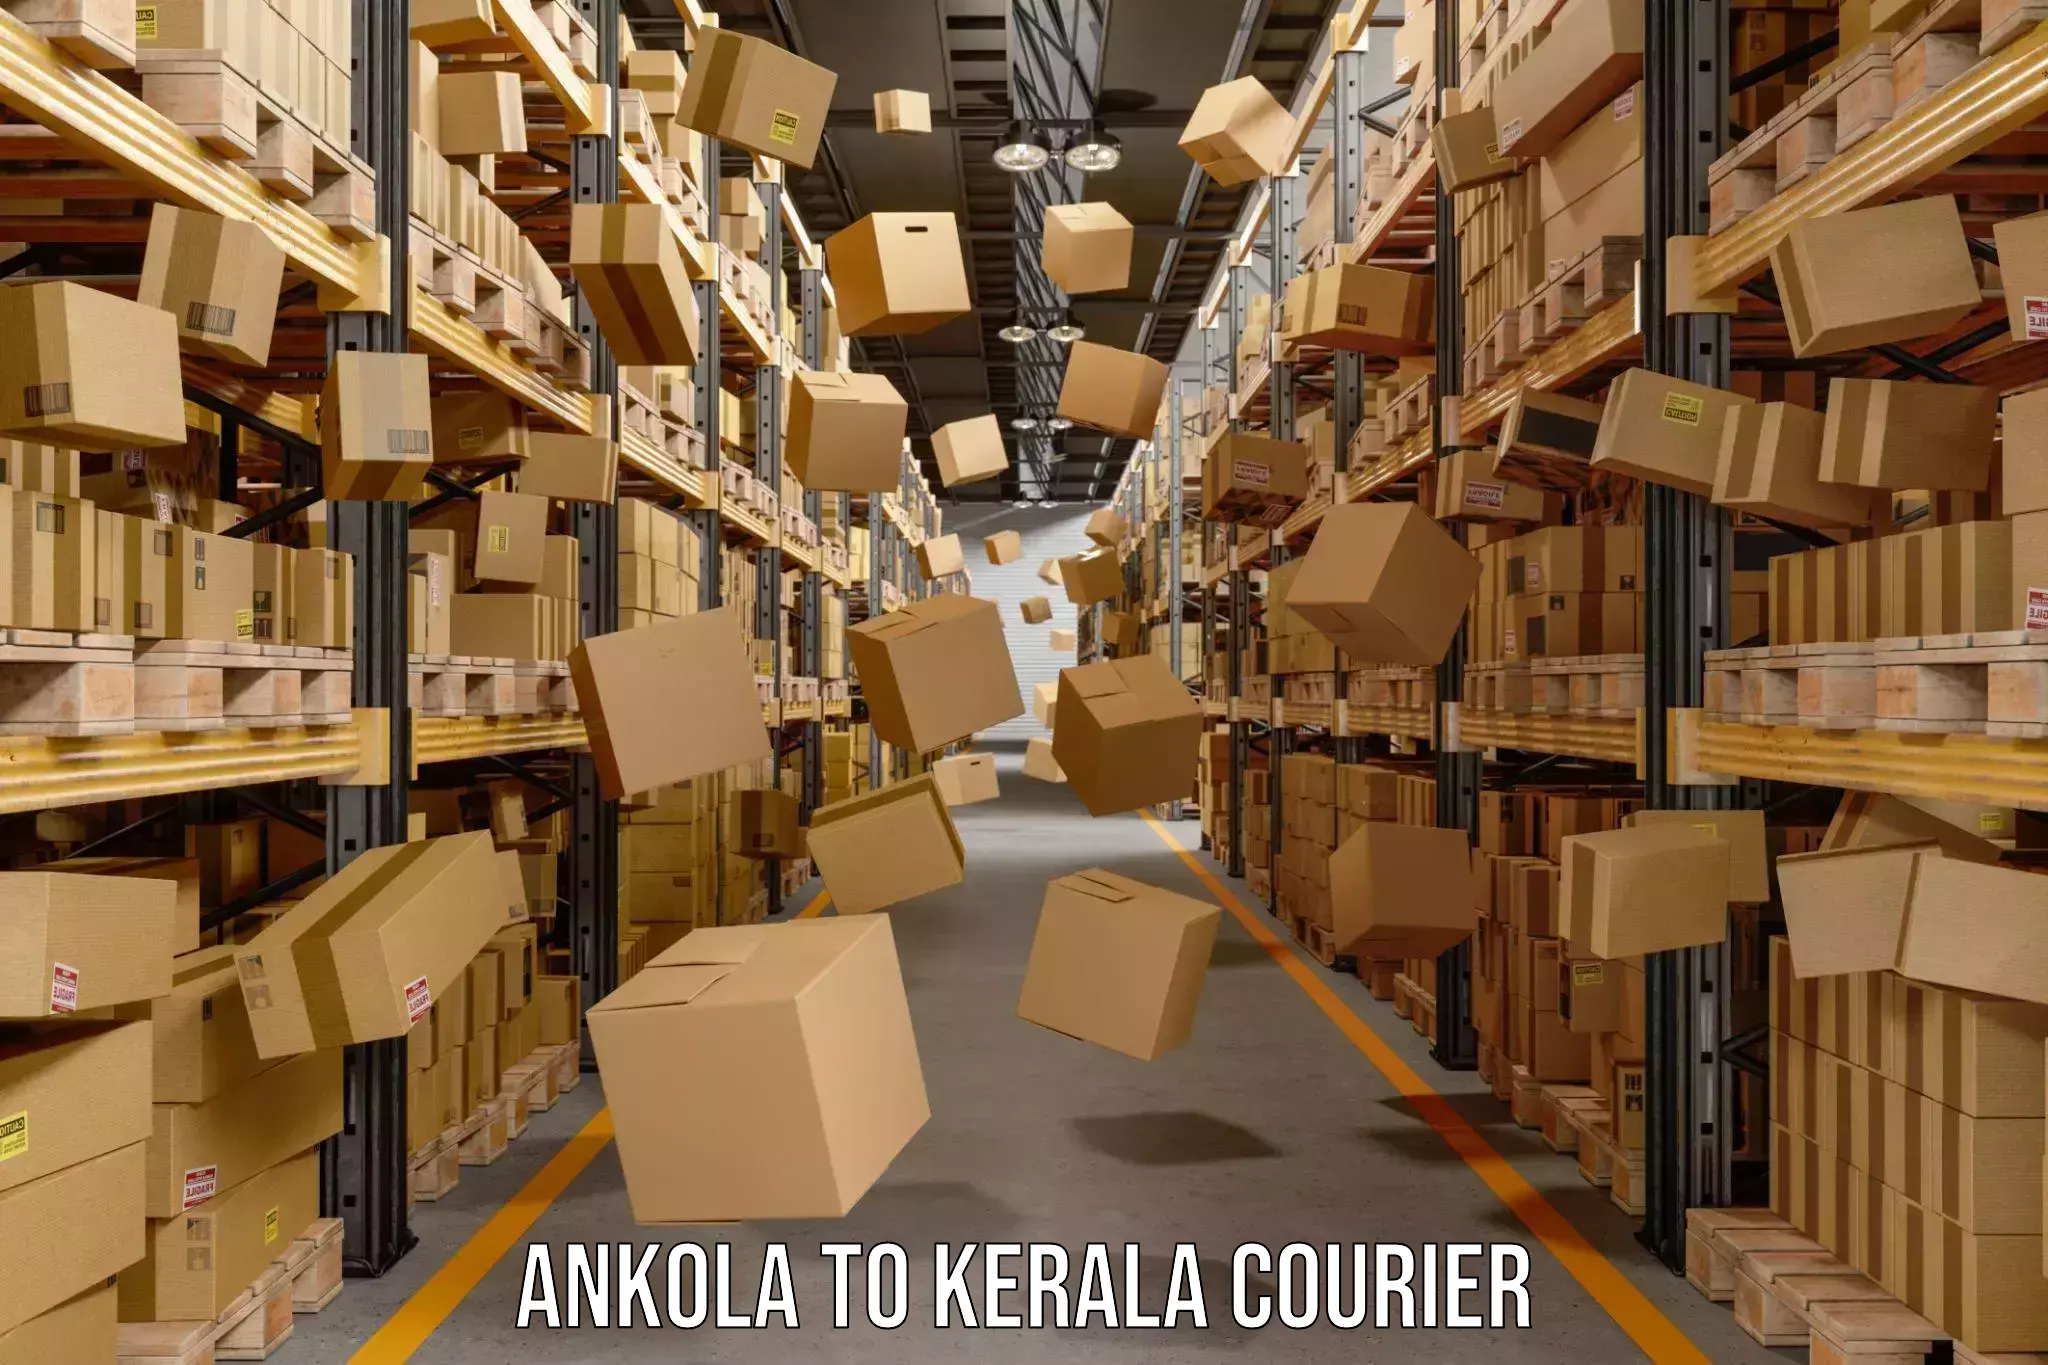 24-hour delivery options Ankola to Trivandrum